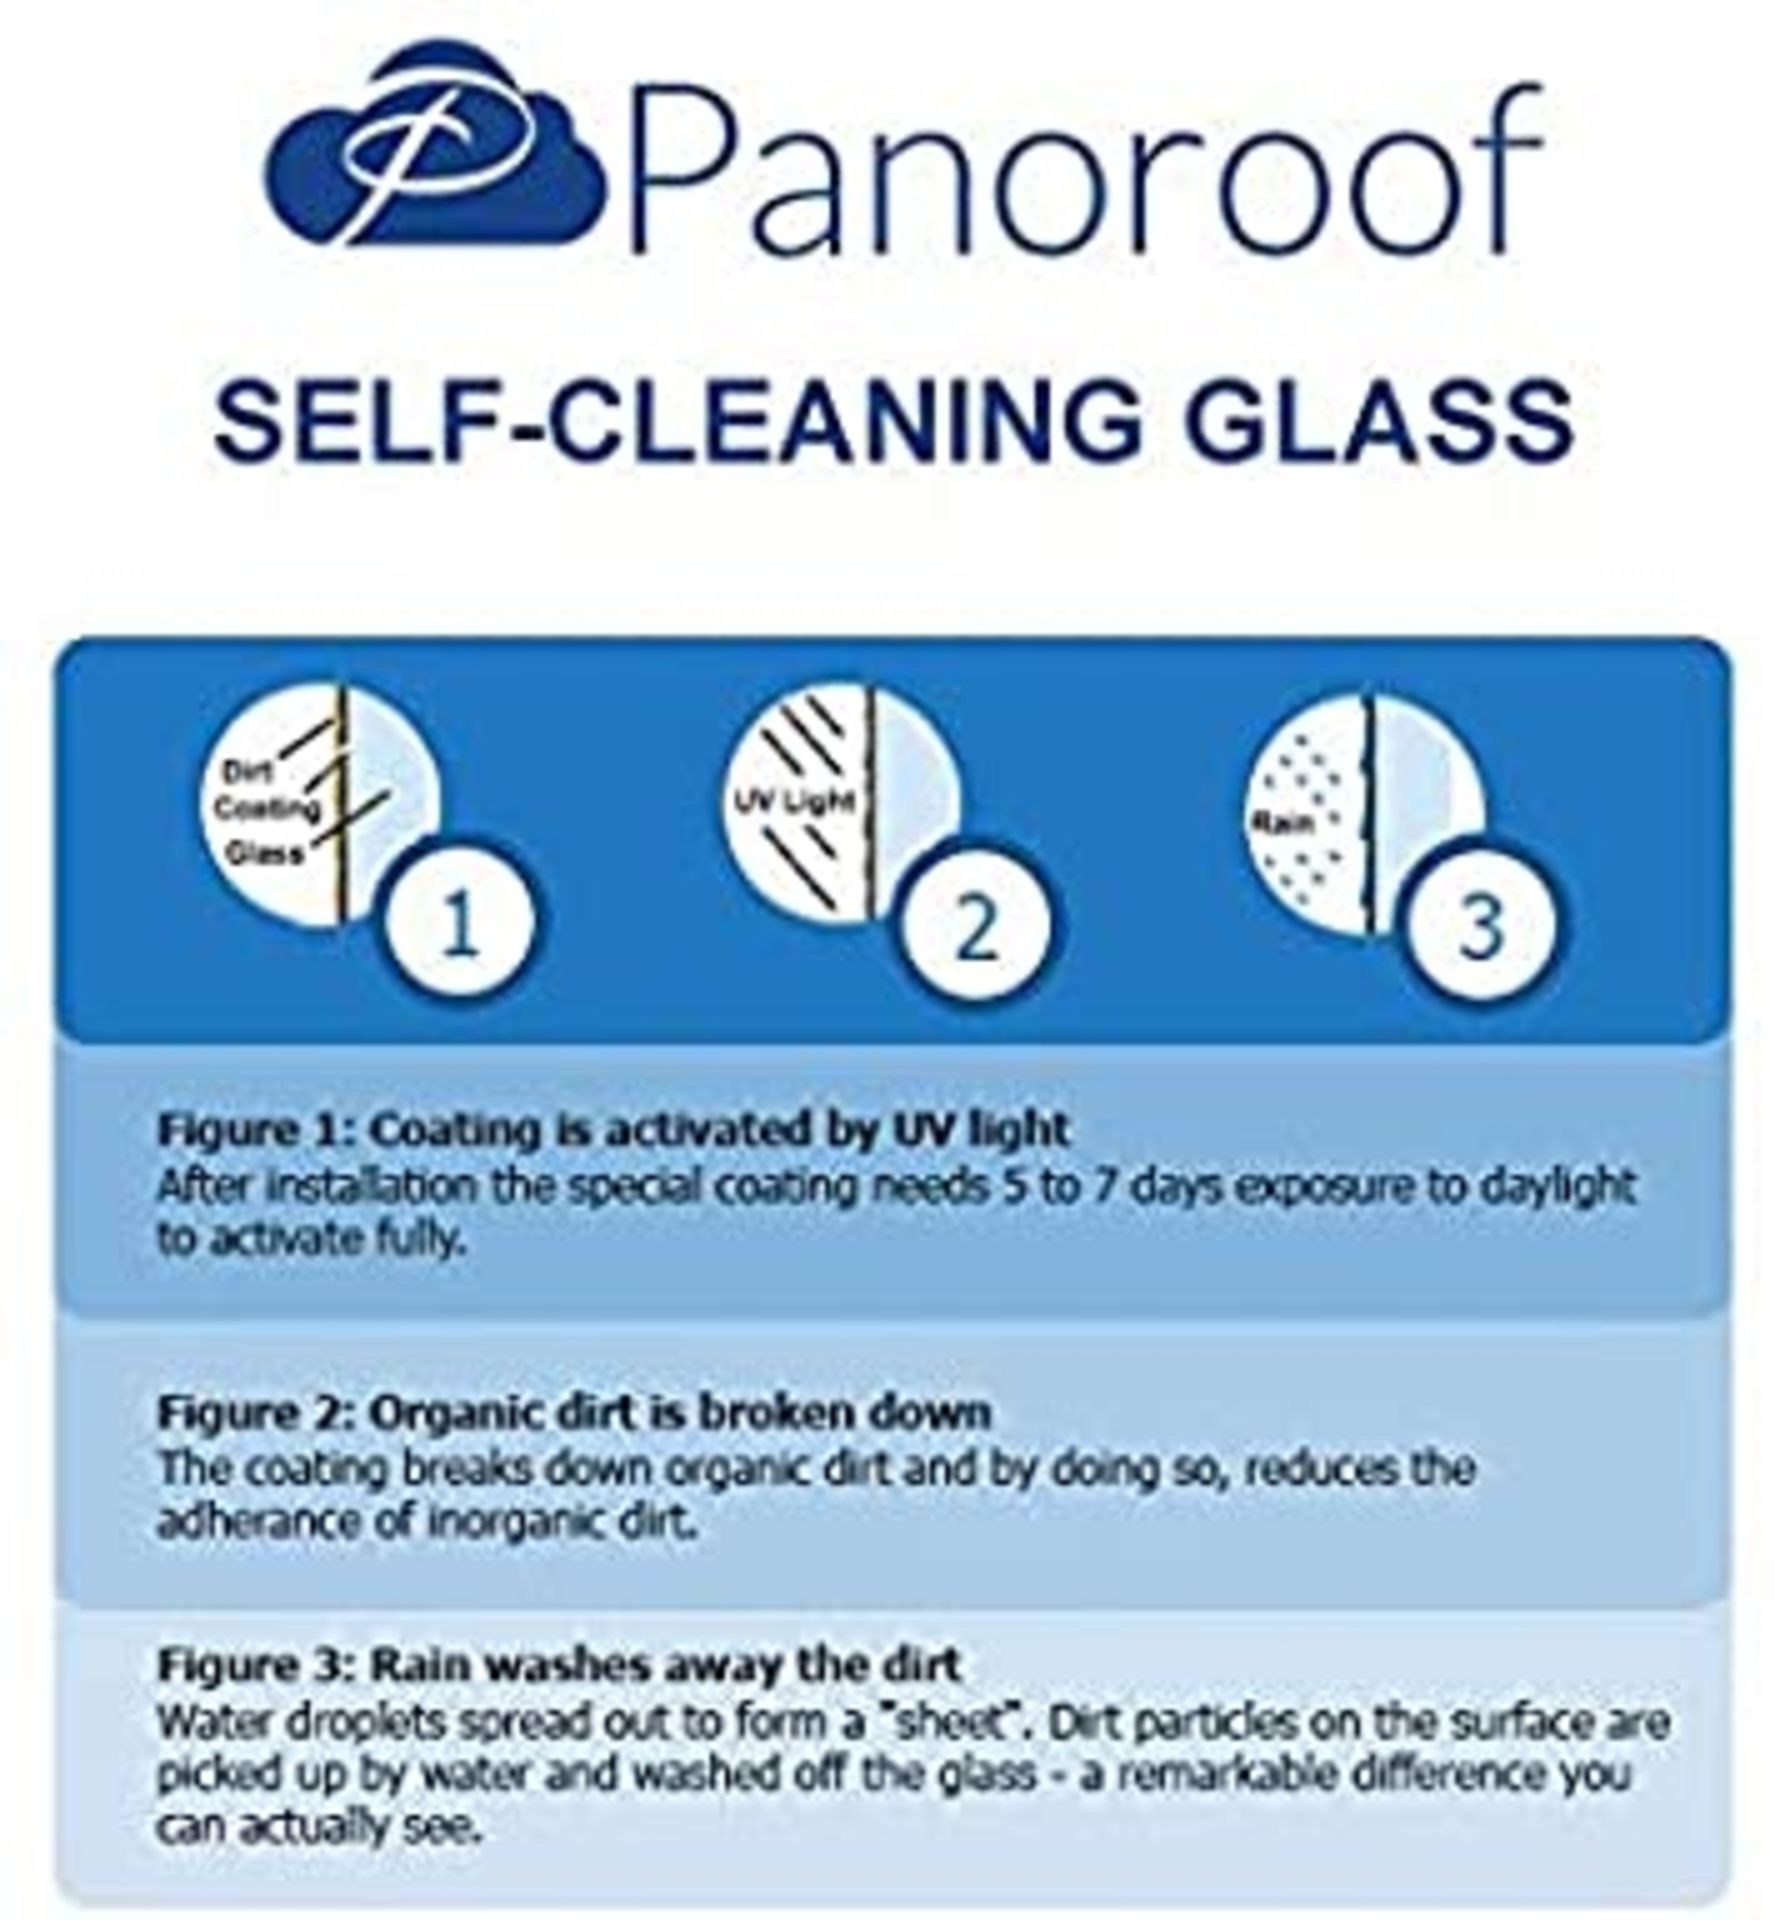 """Panoroof Triple Glazed Self Cleaning 500x500mm (inside Size Visable glass area) Seamless Glass - Image 6 of 6